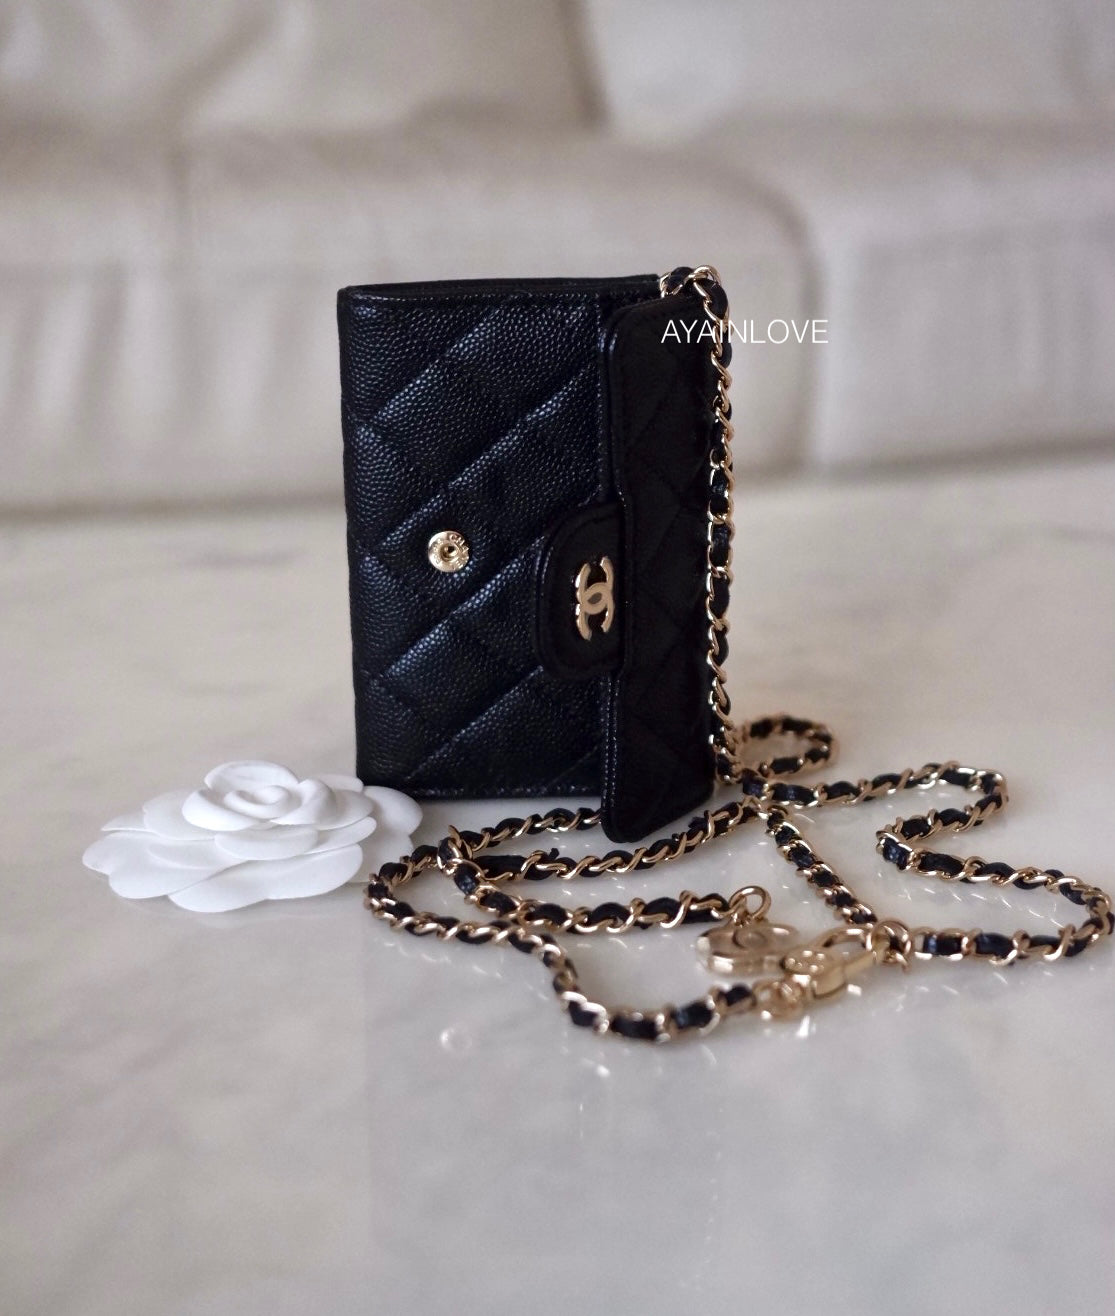 Chanel Phone Holder / Wallet with Chain in Black Caviar and LGHW